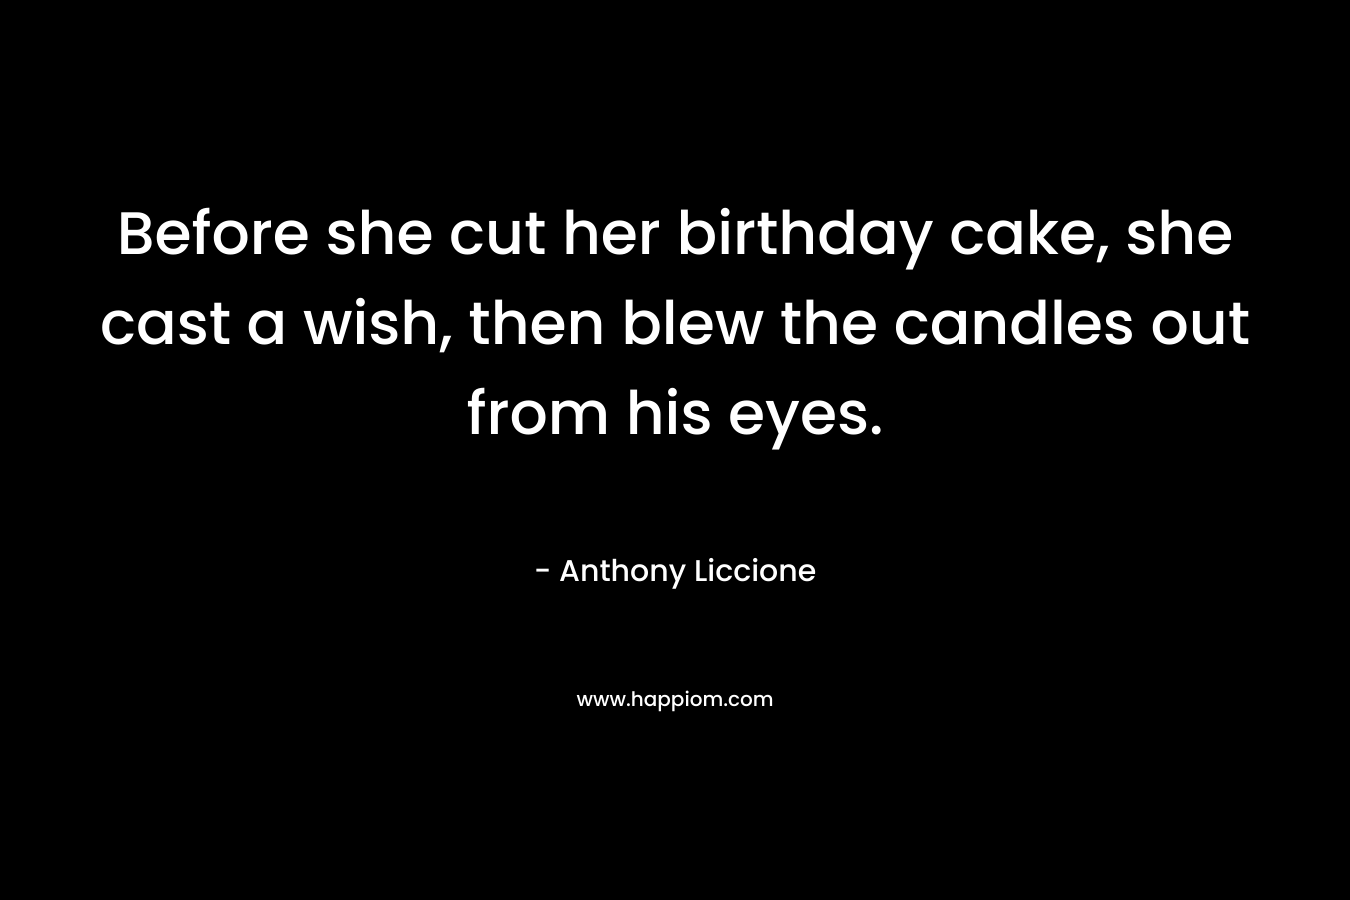 Before she cut her birthday cake, she cast a wish, then blew the candles out from his eyes. – Anthony Liccione